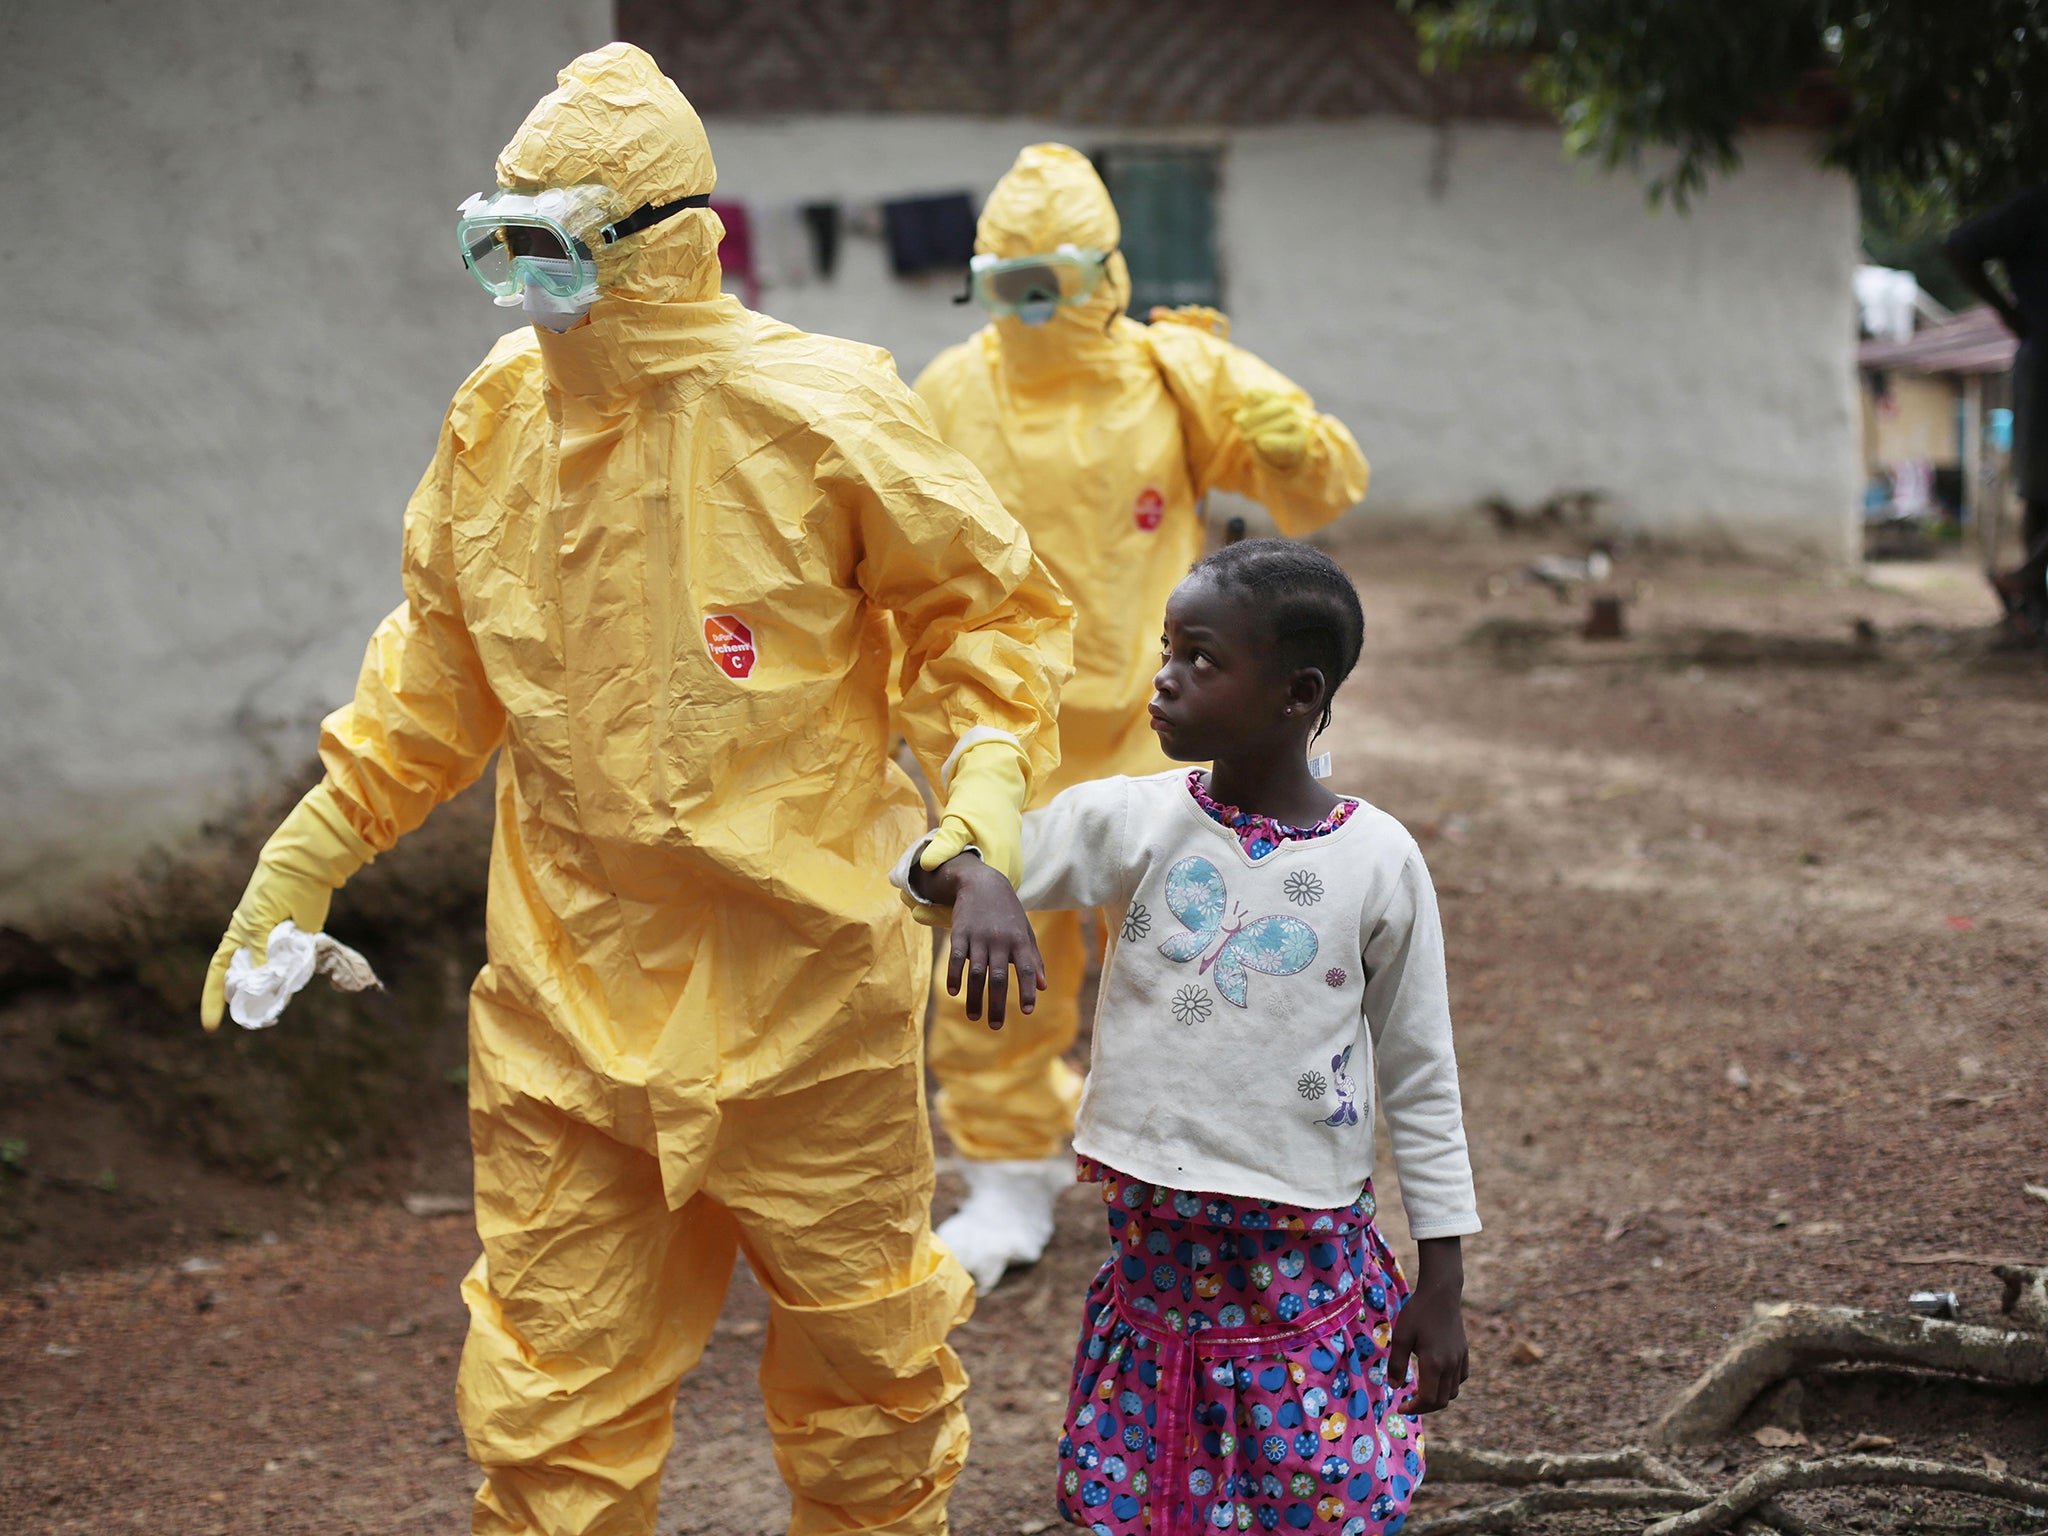 Health workers continue to test people for Ebola infection in Liberia